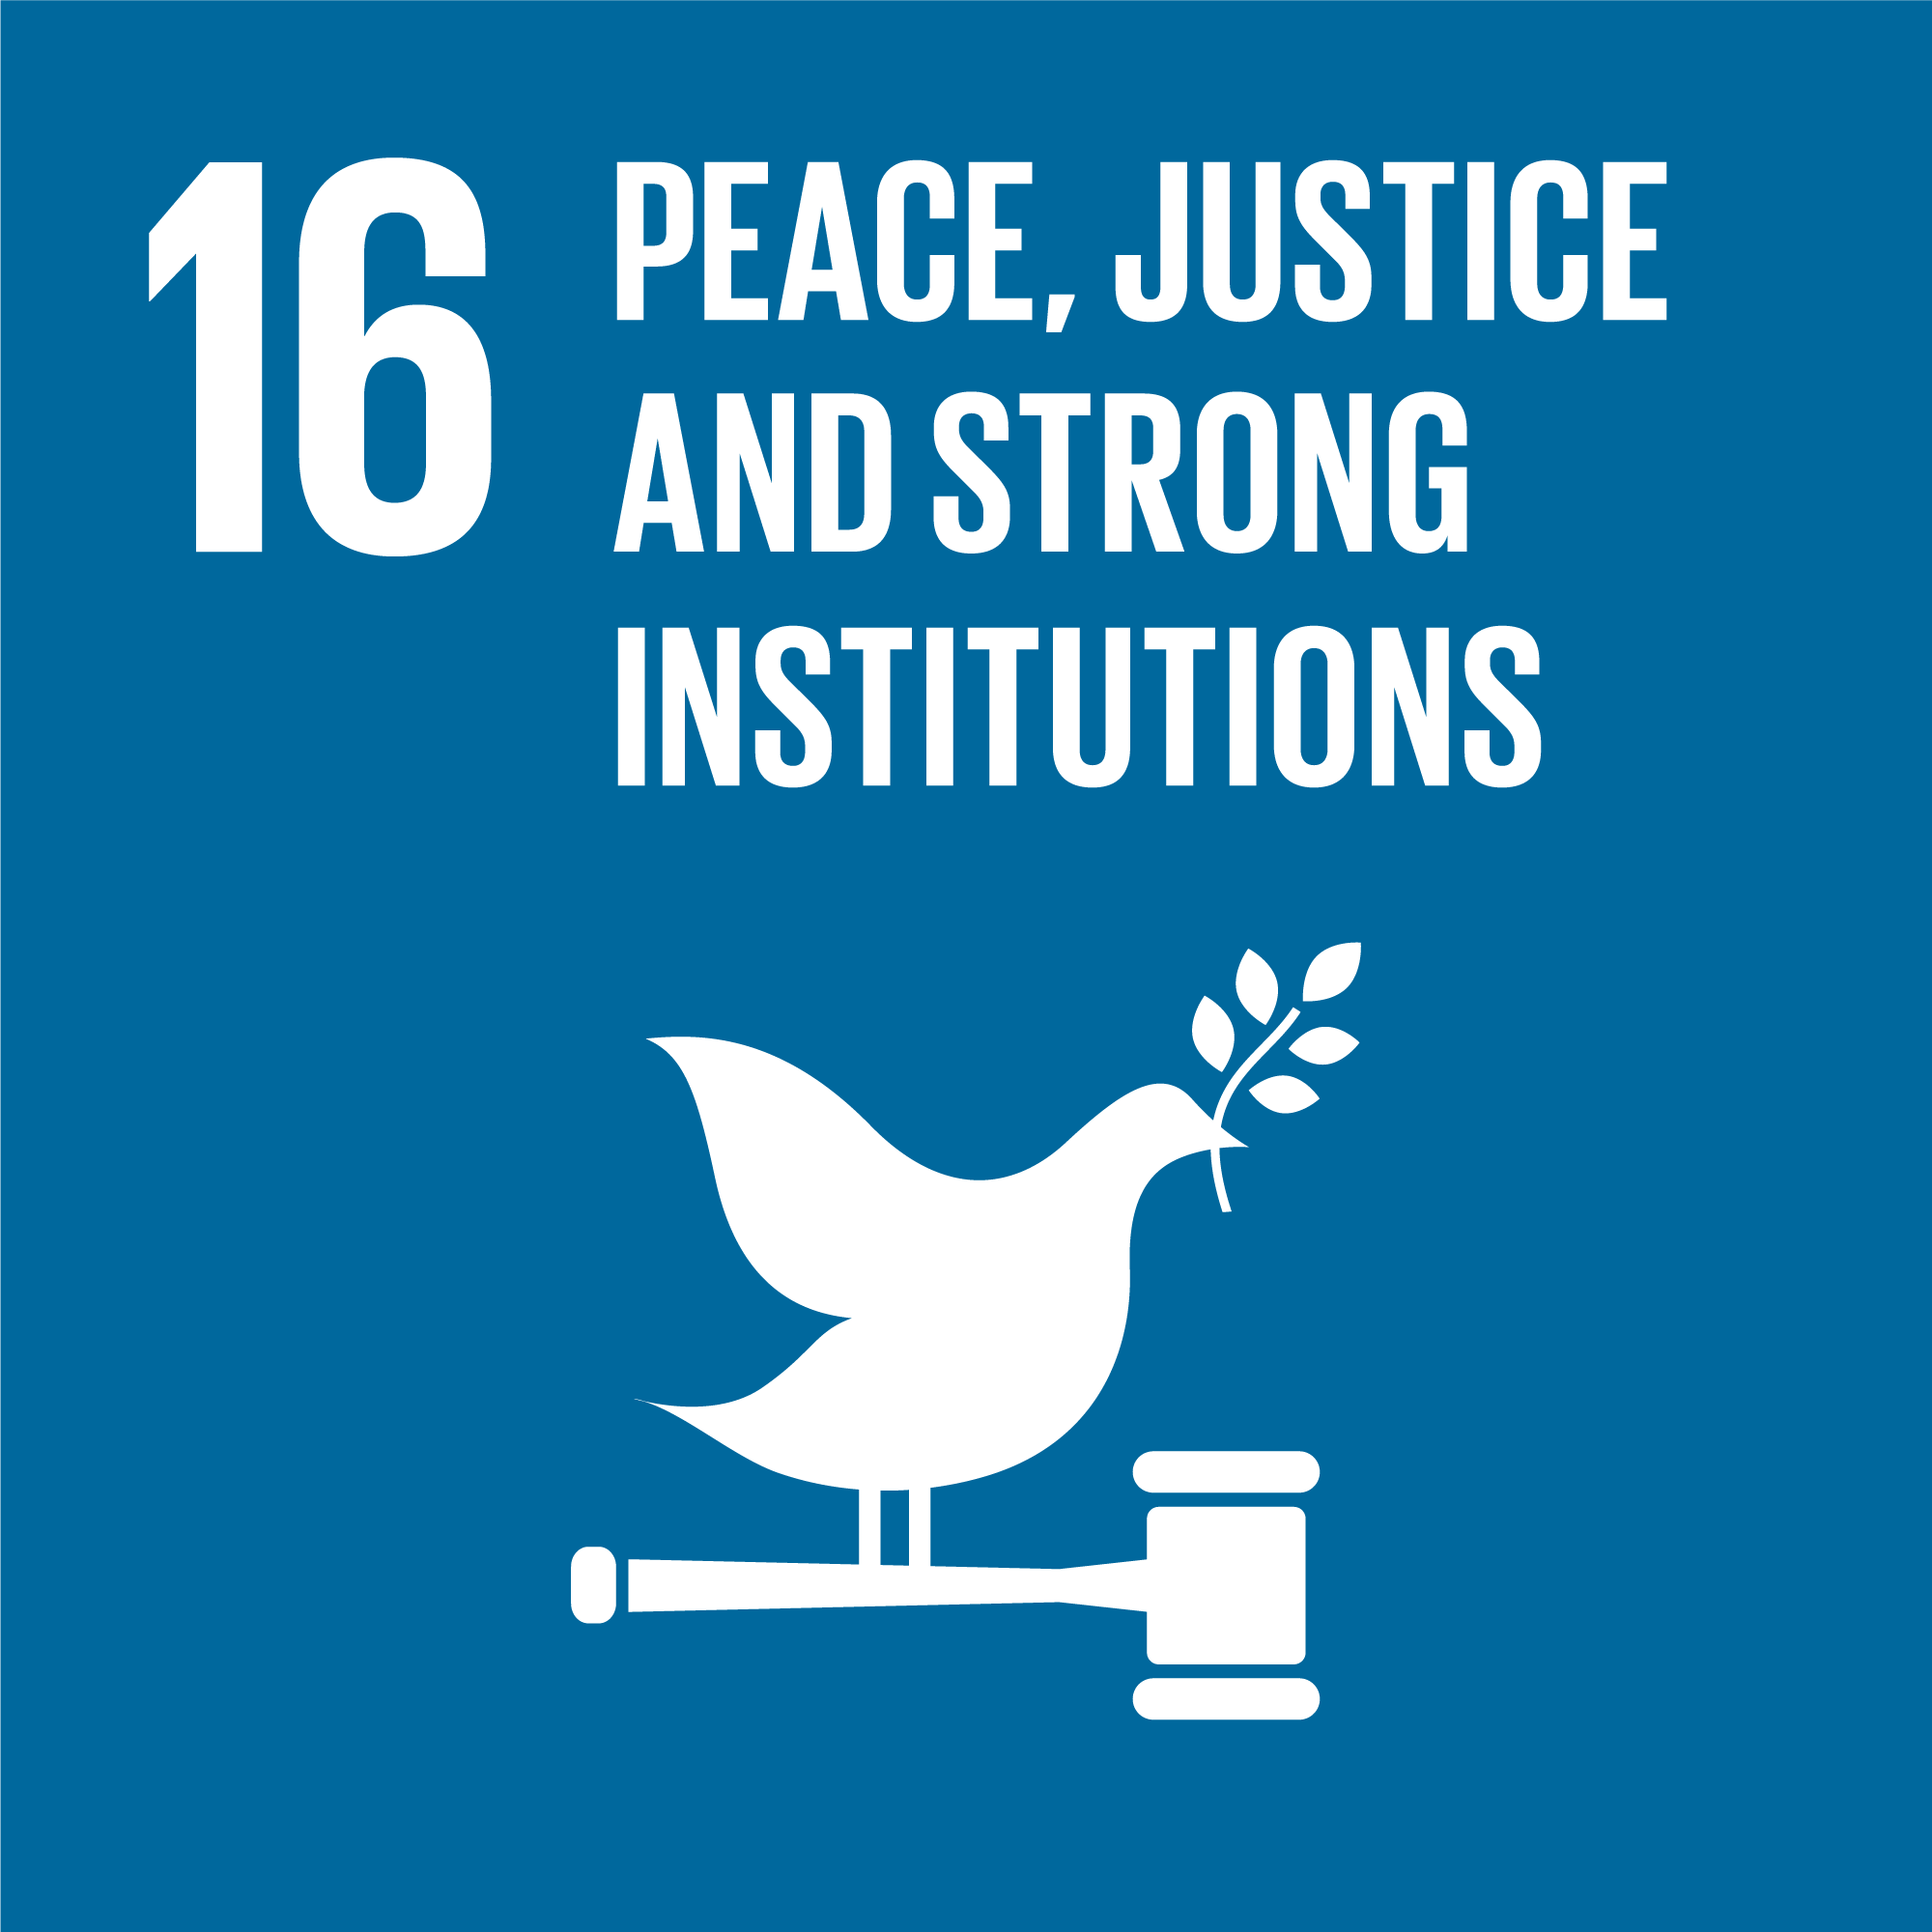 Global Goal 16: Peace, Justice and Strong Institutions